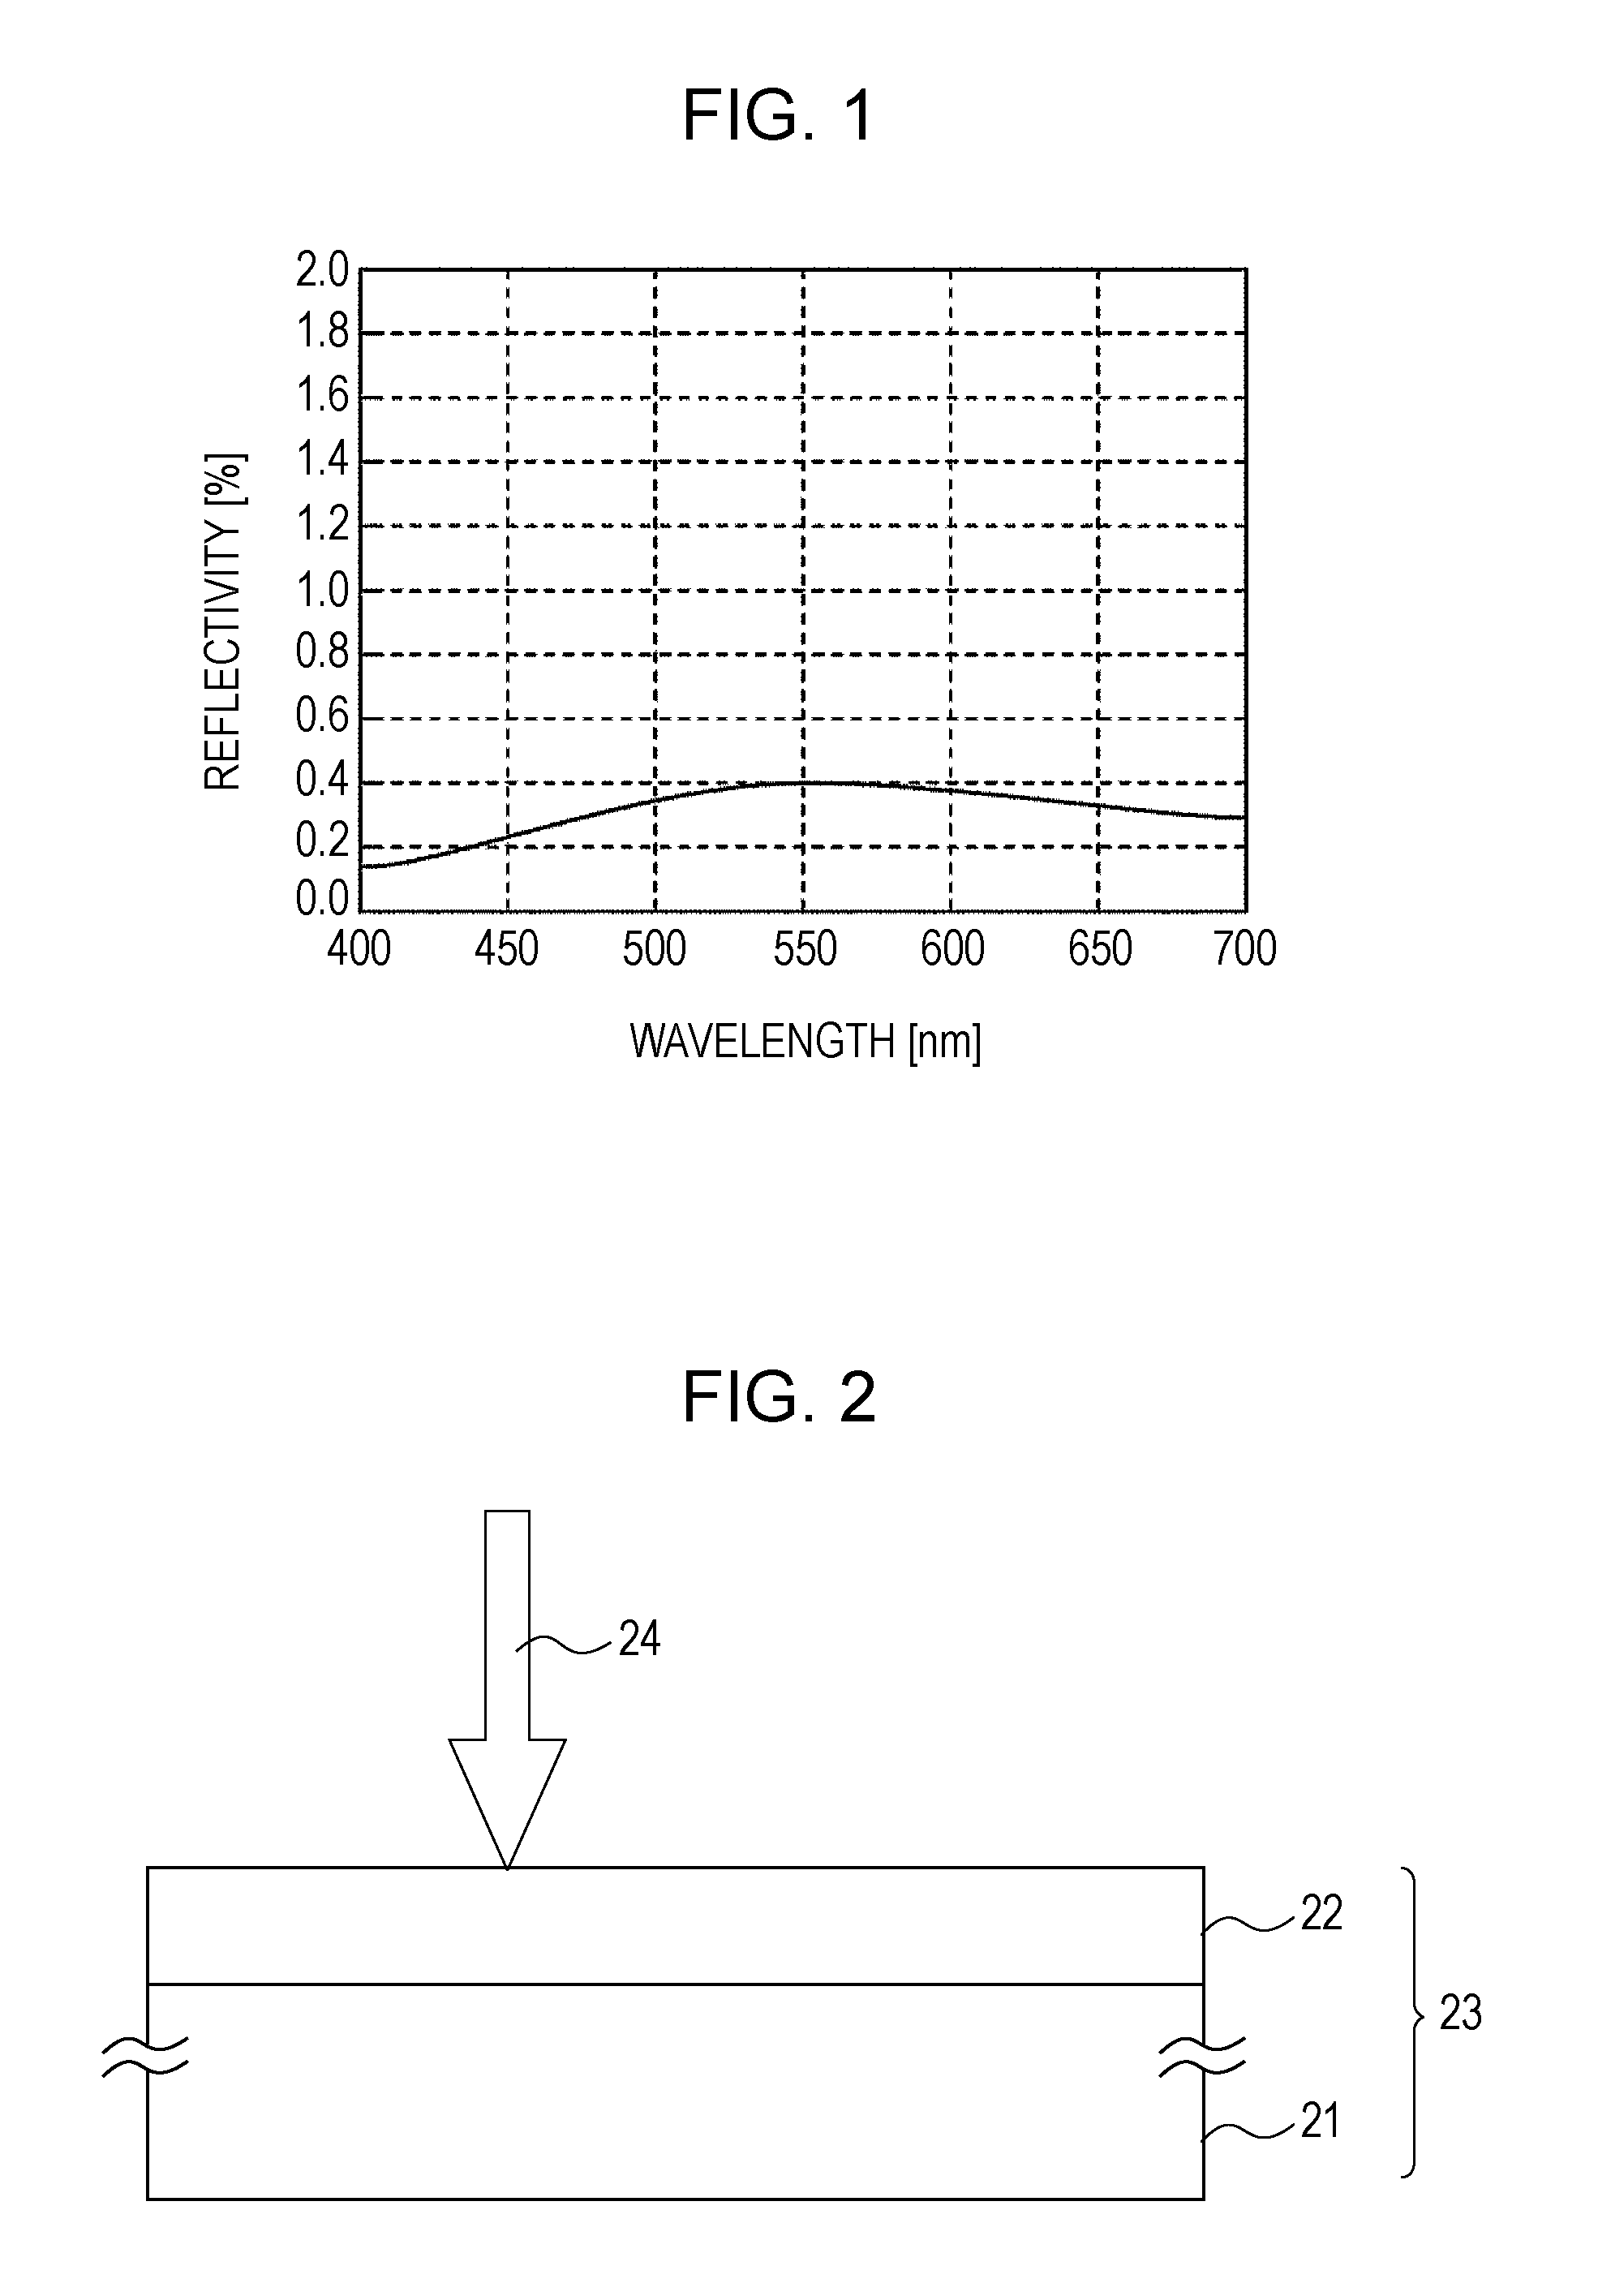 Optical element, optical system including the optical element, and optical apparatus including the optical system